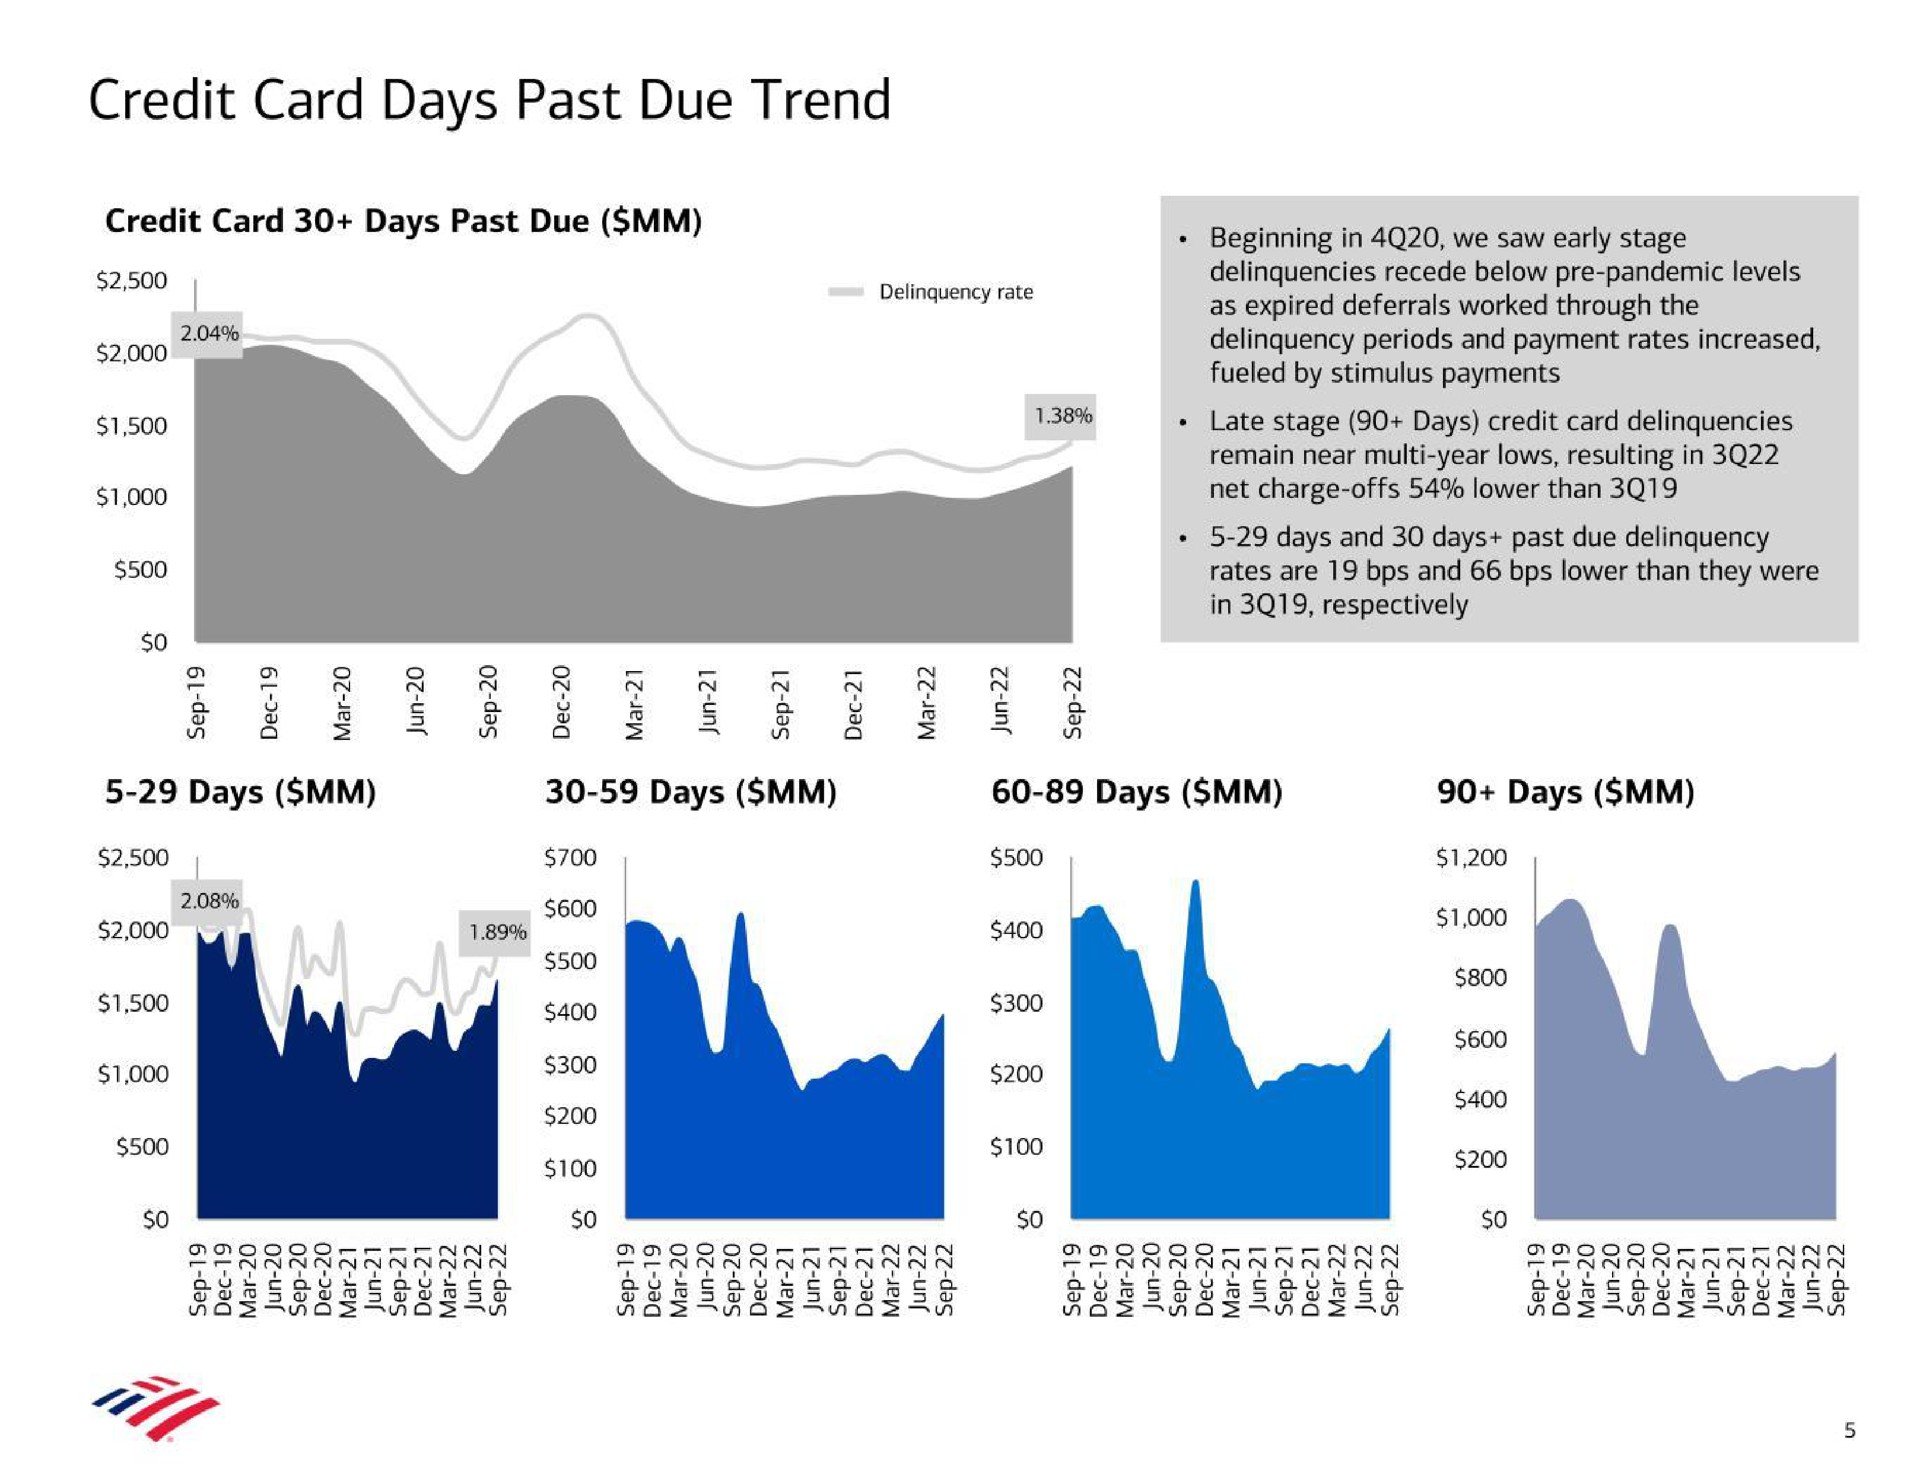 credit card days past due trend credit card days past due days days days days | Bank of America